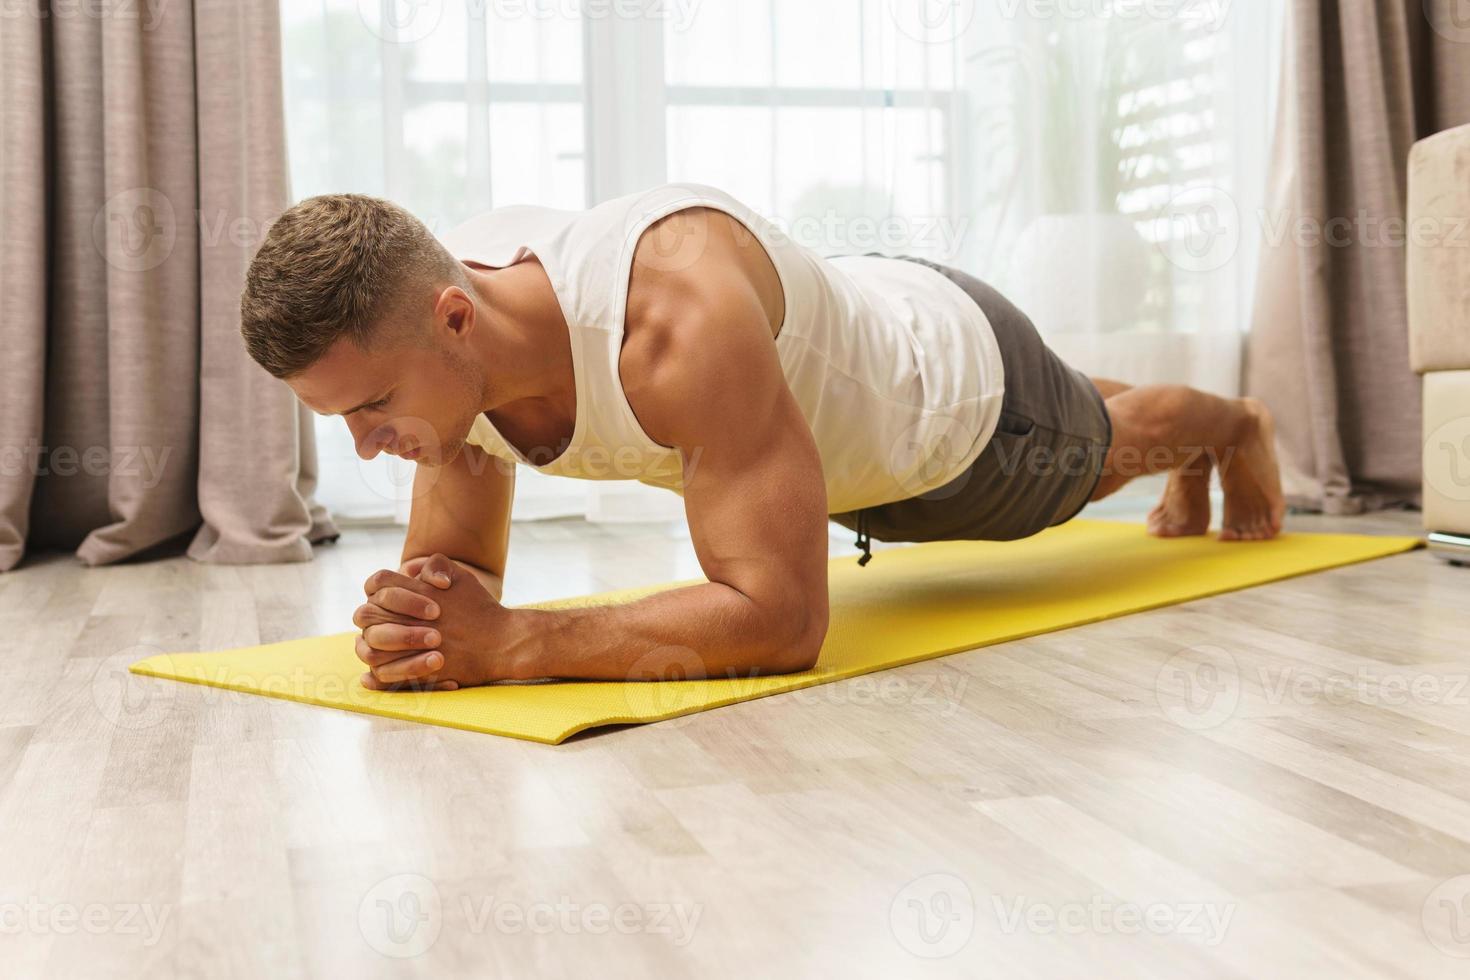 Man doing plank during intense home workout photo